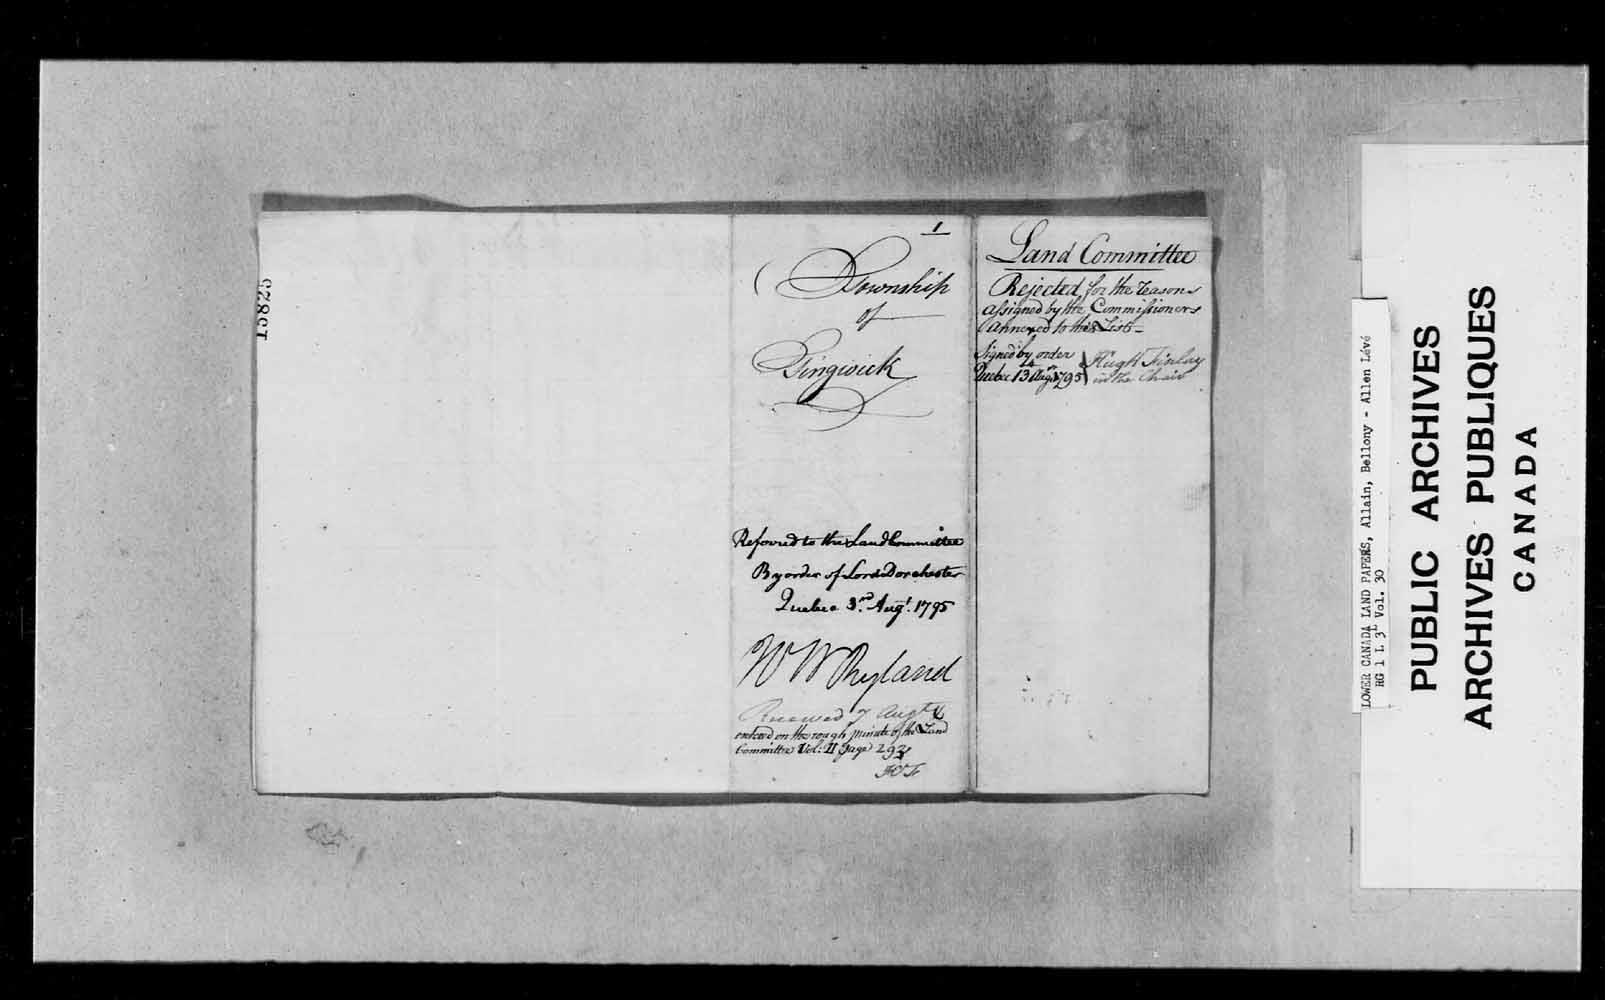 Digitized page of  for Image No.: e003702655